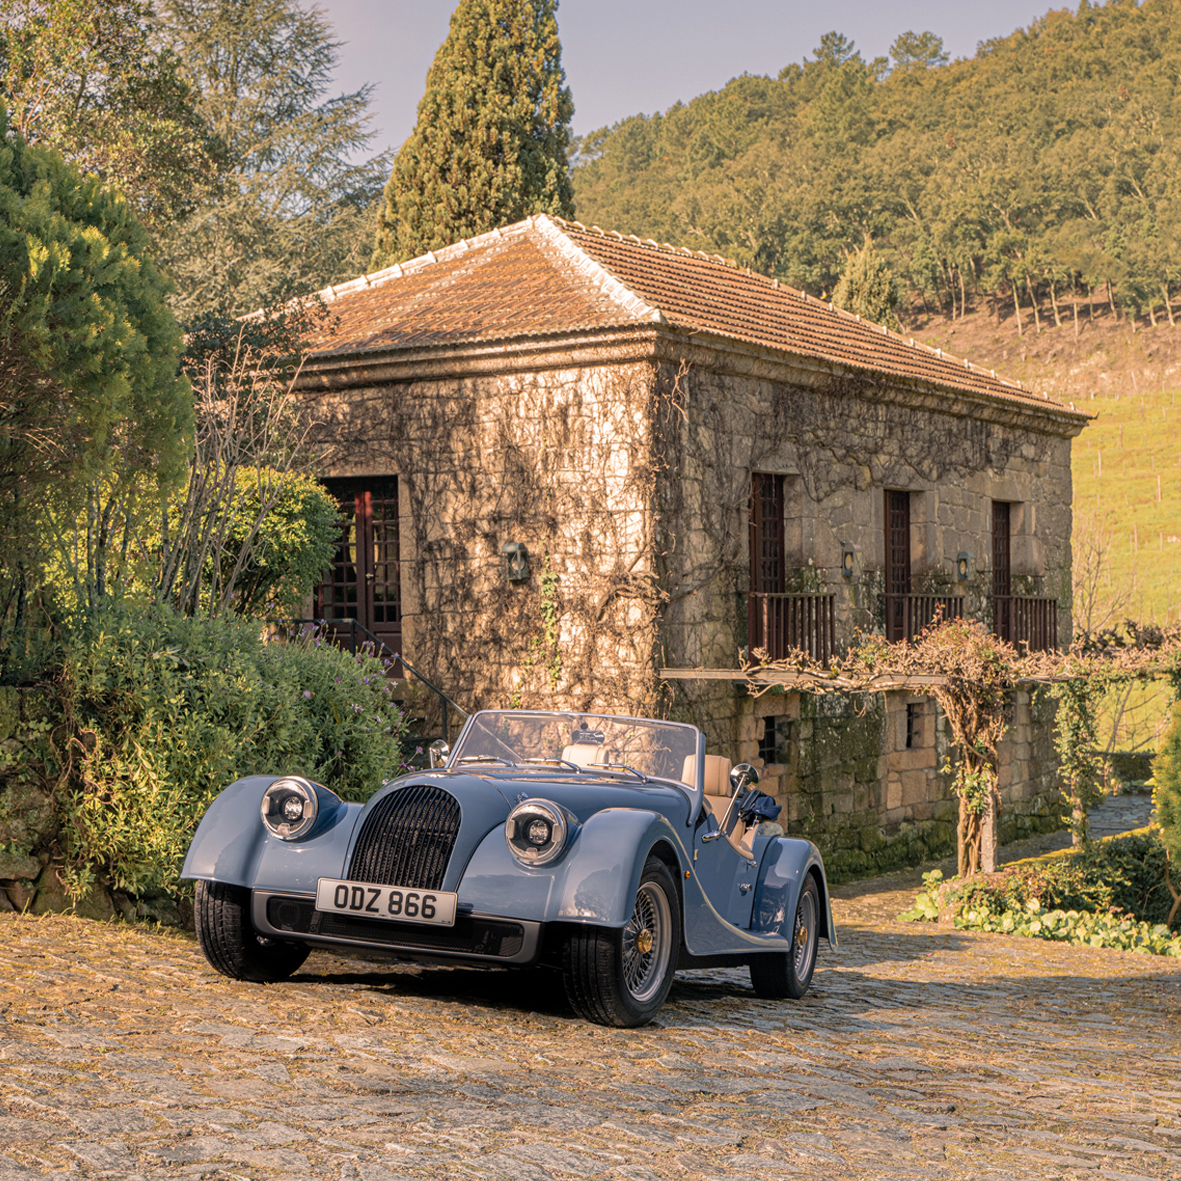 Our #May issue is out now, pick up a copy to discover more about the latest #Morgan Plus Four, launched by iconic Malvern car maker! Pick up a copy locally.

📷 Morgan Plus Four

#dorset #hampshire #motoring #interior #garden #outdoorliving #recipes #cocktailrecipe #travel